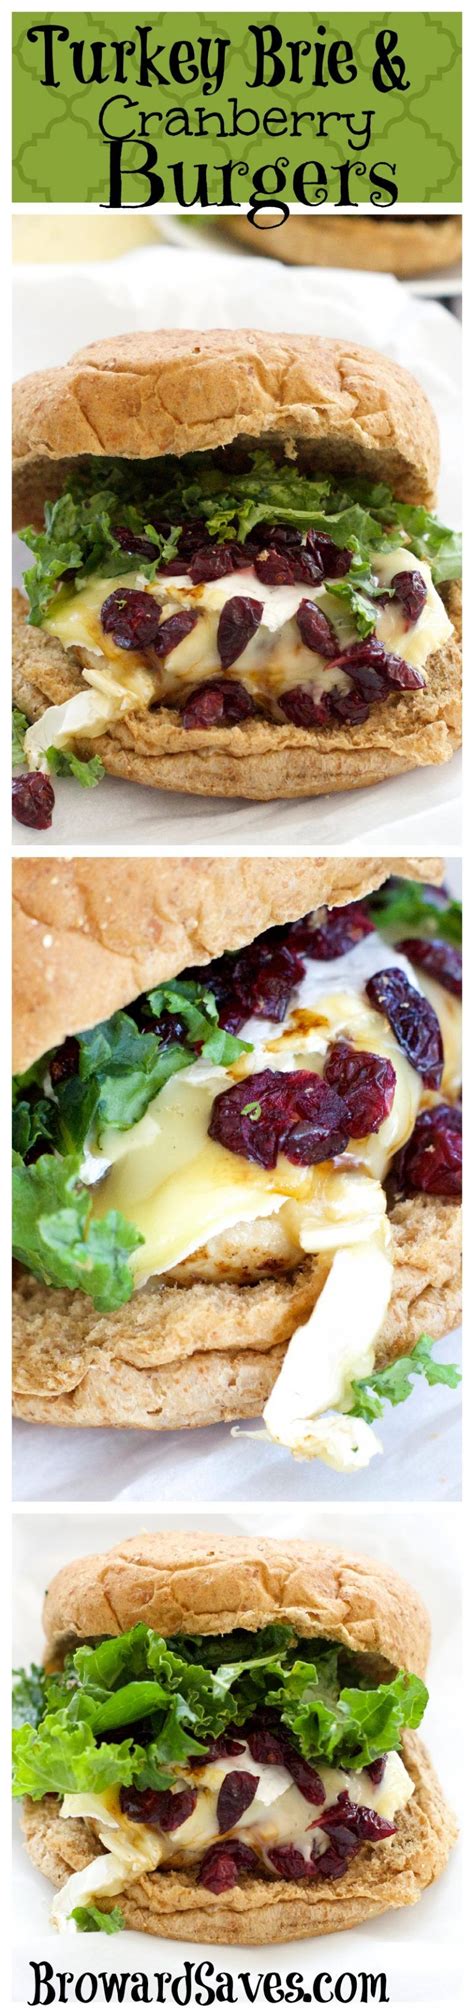 These Delicious Turkey Burgers With Brie And Cranberry Cooks In